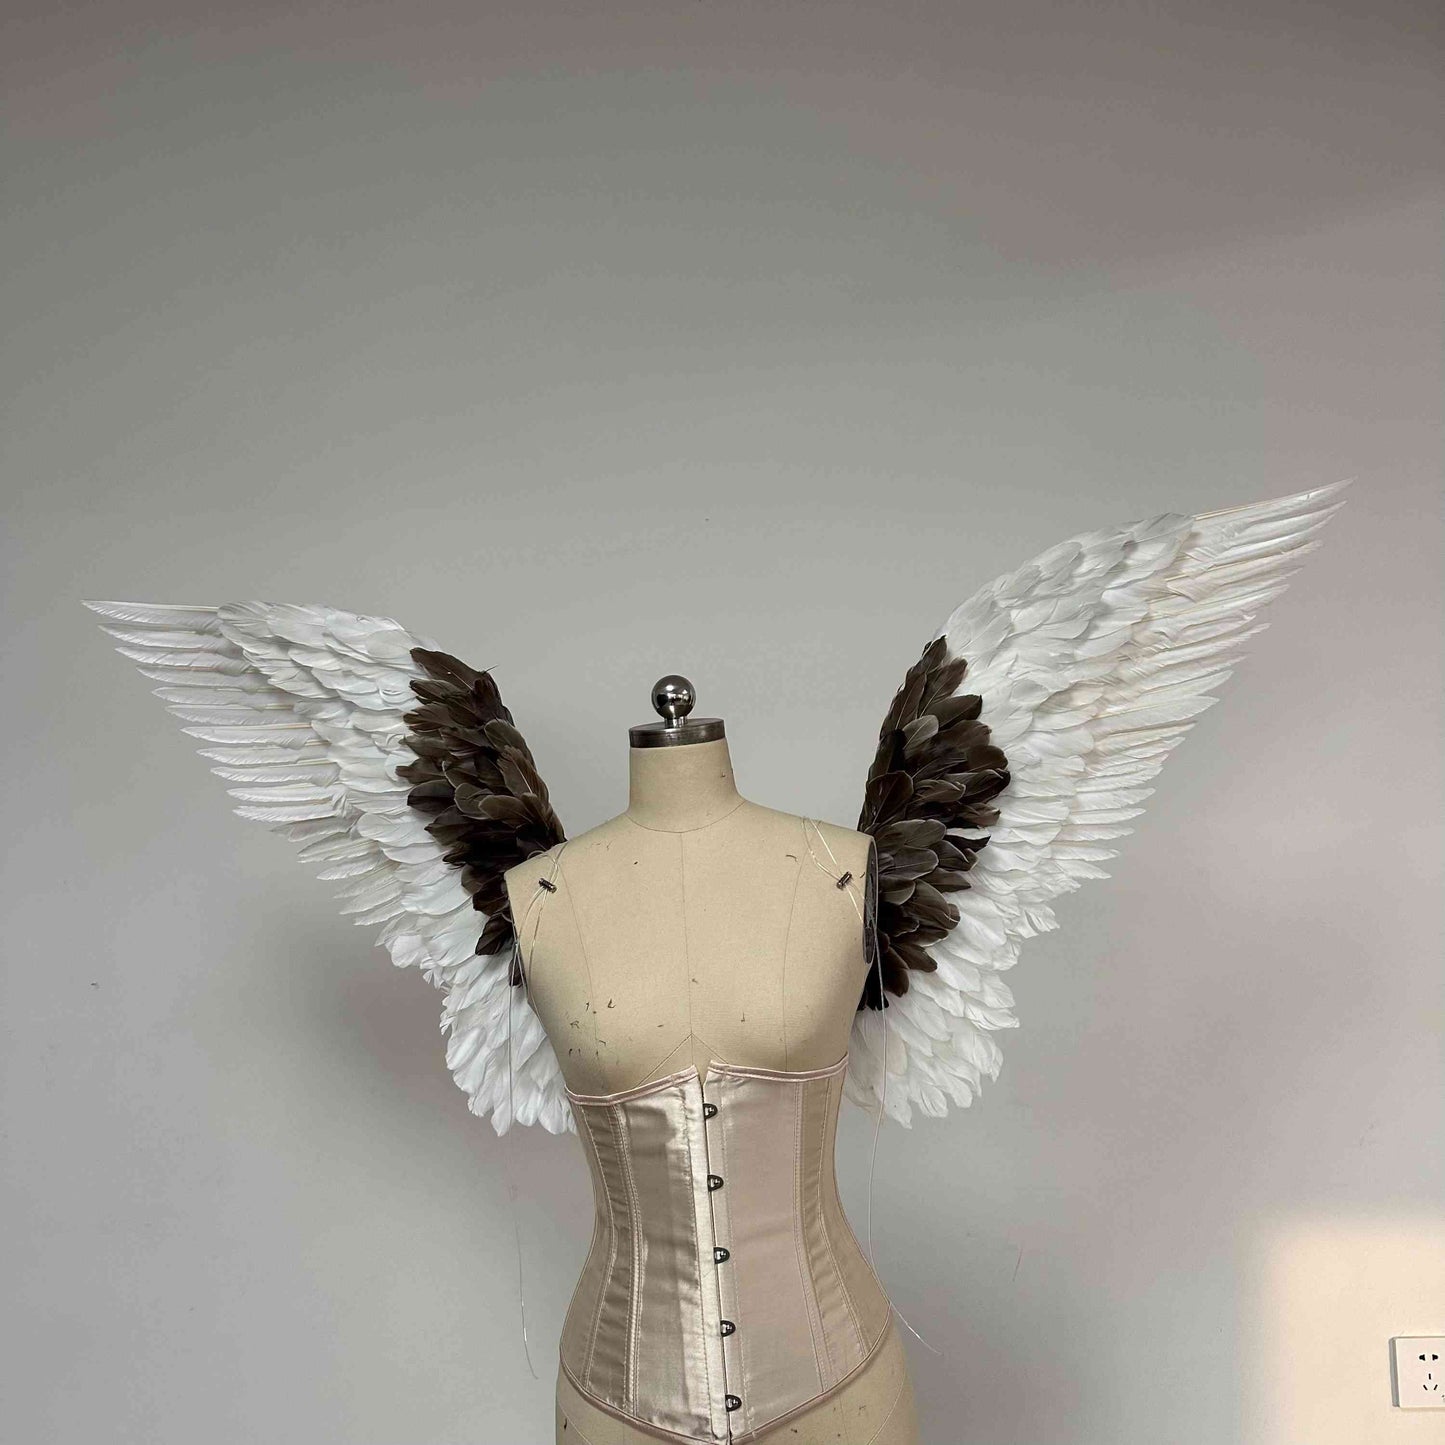 Our white gray angel wings from the front. Made from goose feathers. Wings for angel wings costume. Suitable for photoshoots.